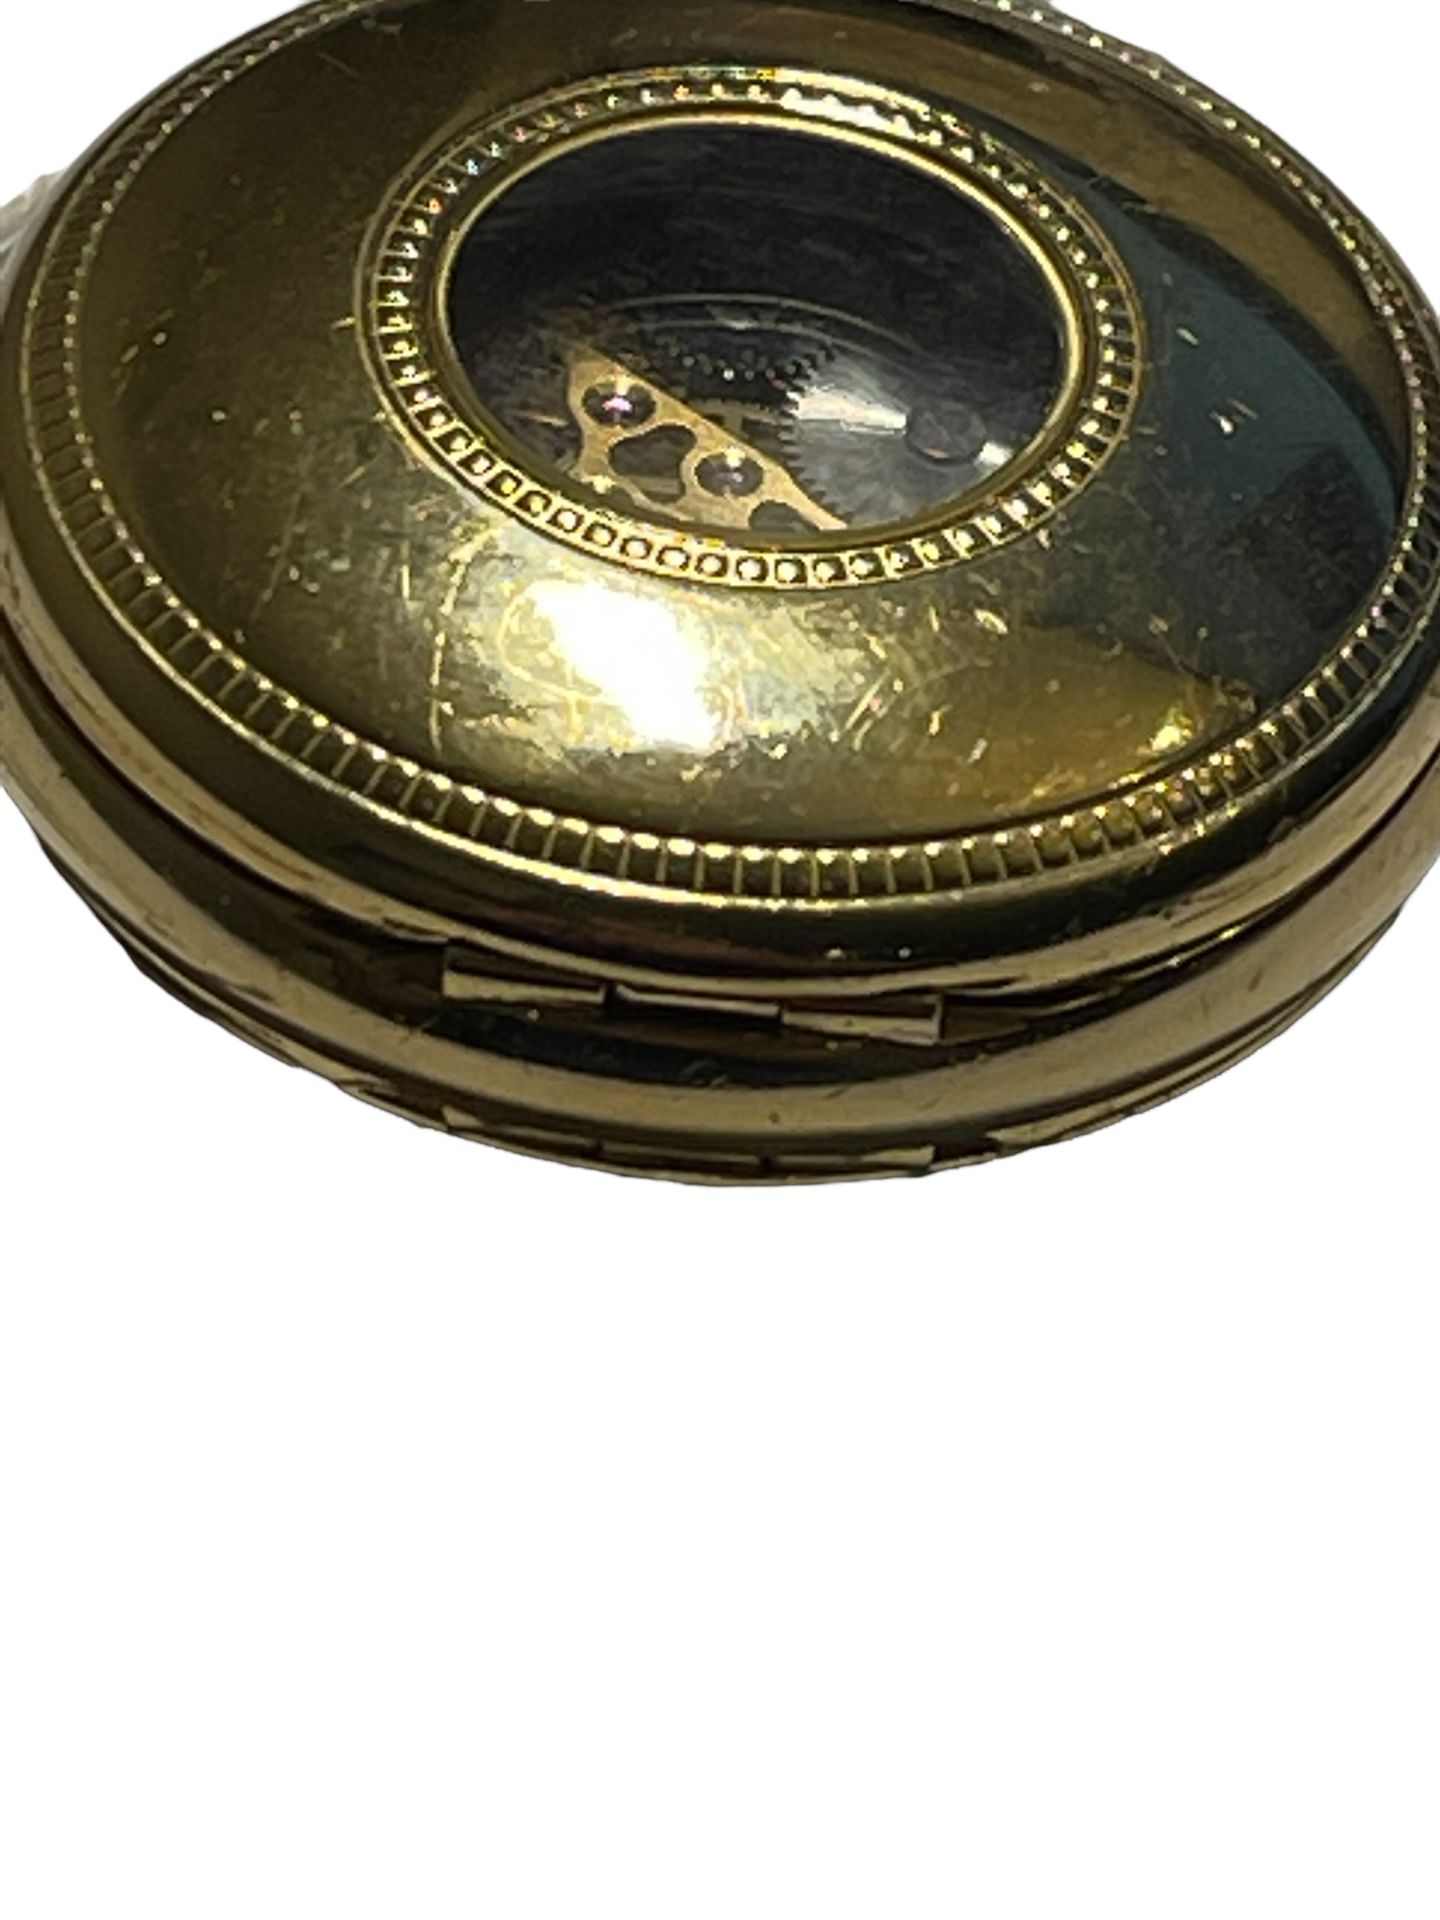 Gold Plated Mechanical Rotary Pocket Watch RRP £209 - Ex Demo from our Private Jet Charter - Image 11 of 11